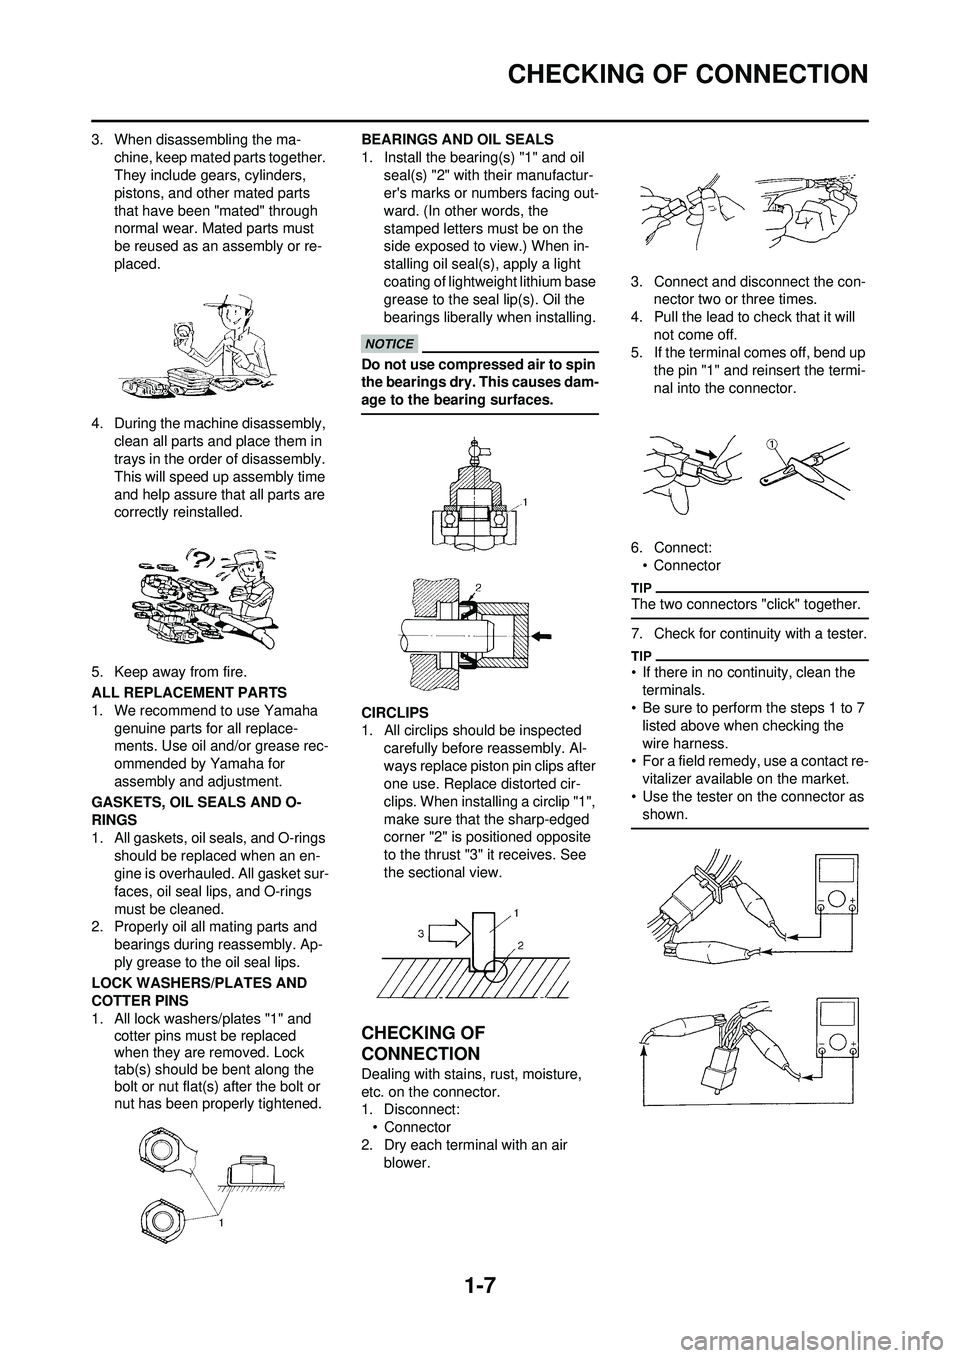 YAMAHA WR 250F 2010 User Guide 1-7
CHECKING OF CONNECTION
3. When disassembling the ma-chine, keep mated parts together. 
They include gears, cylinders, 
pistons, and other mated parts 
that have been "mated" through 
normal wear. 